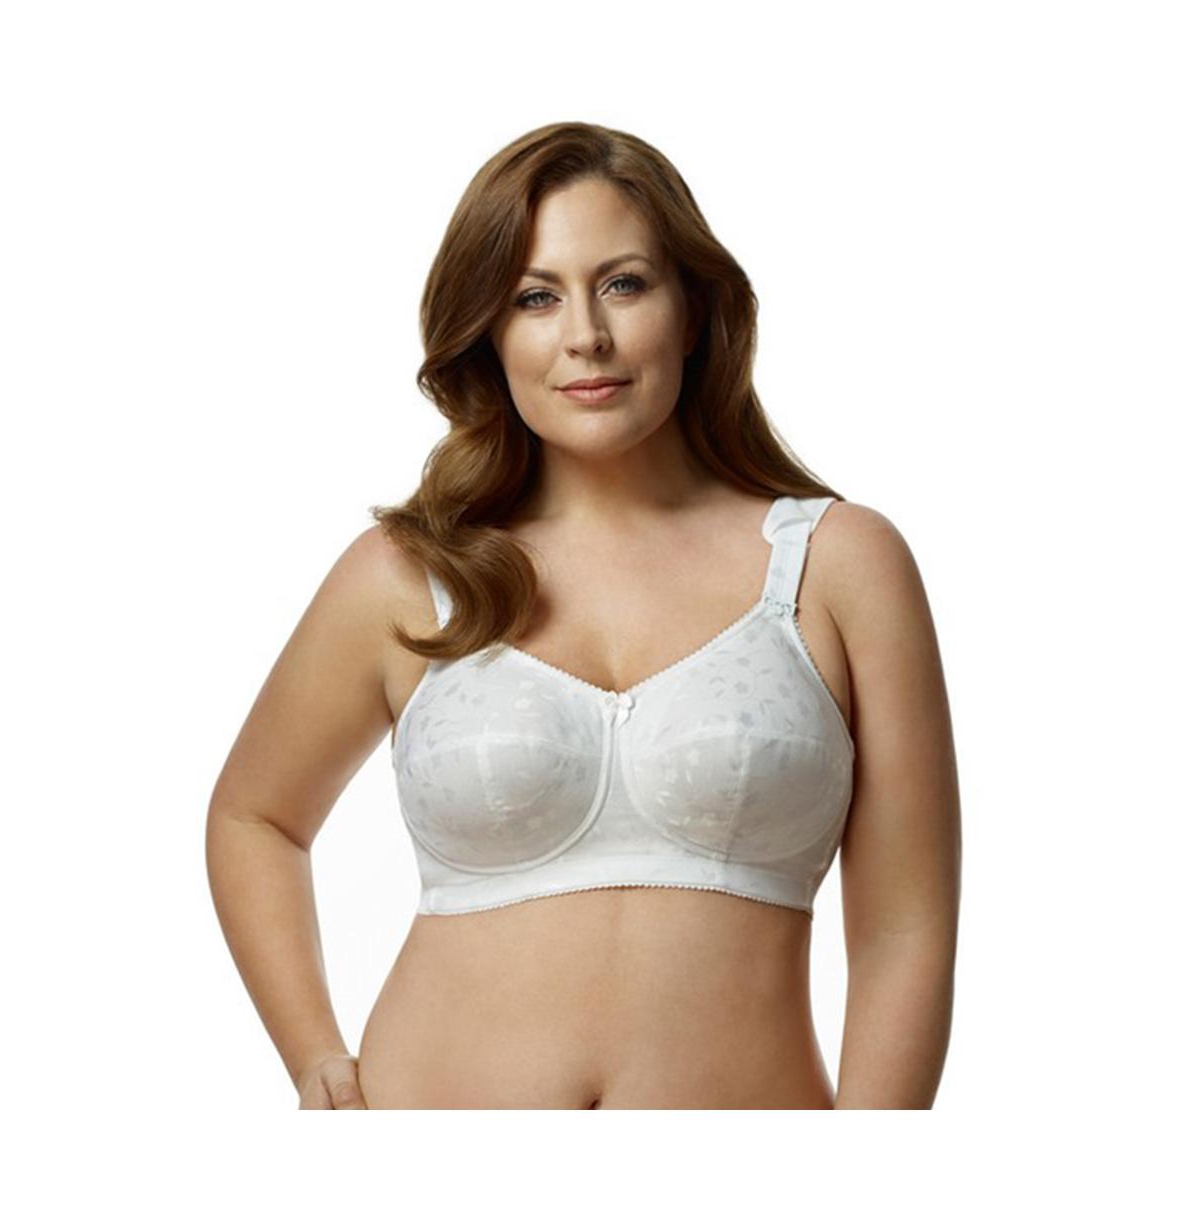 Elila Swiss Embroidered Soft Cup Wire-Free Bra - Black - Curvy